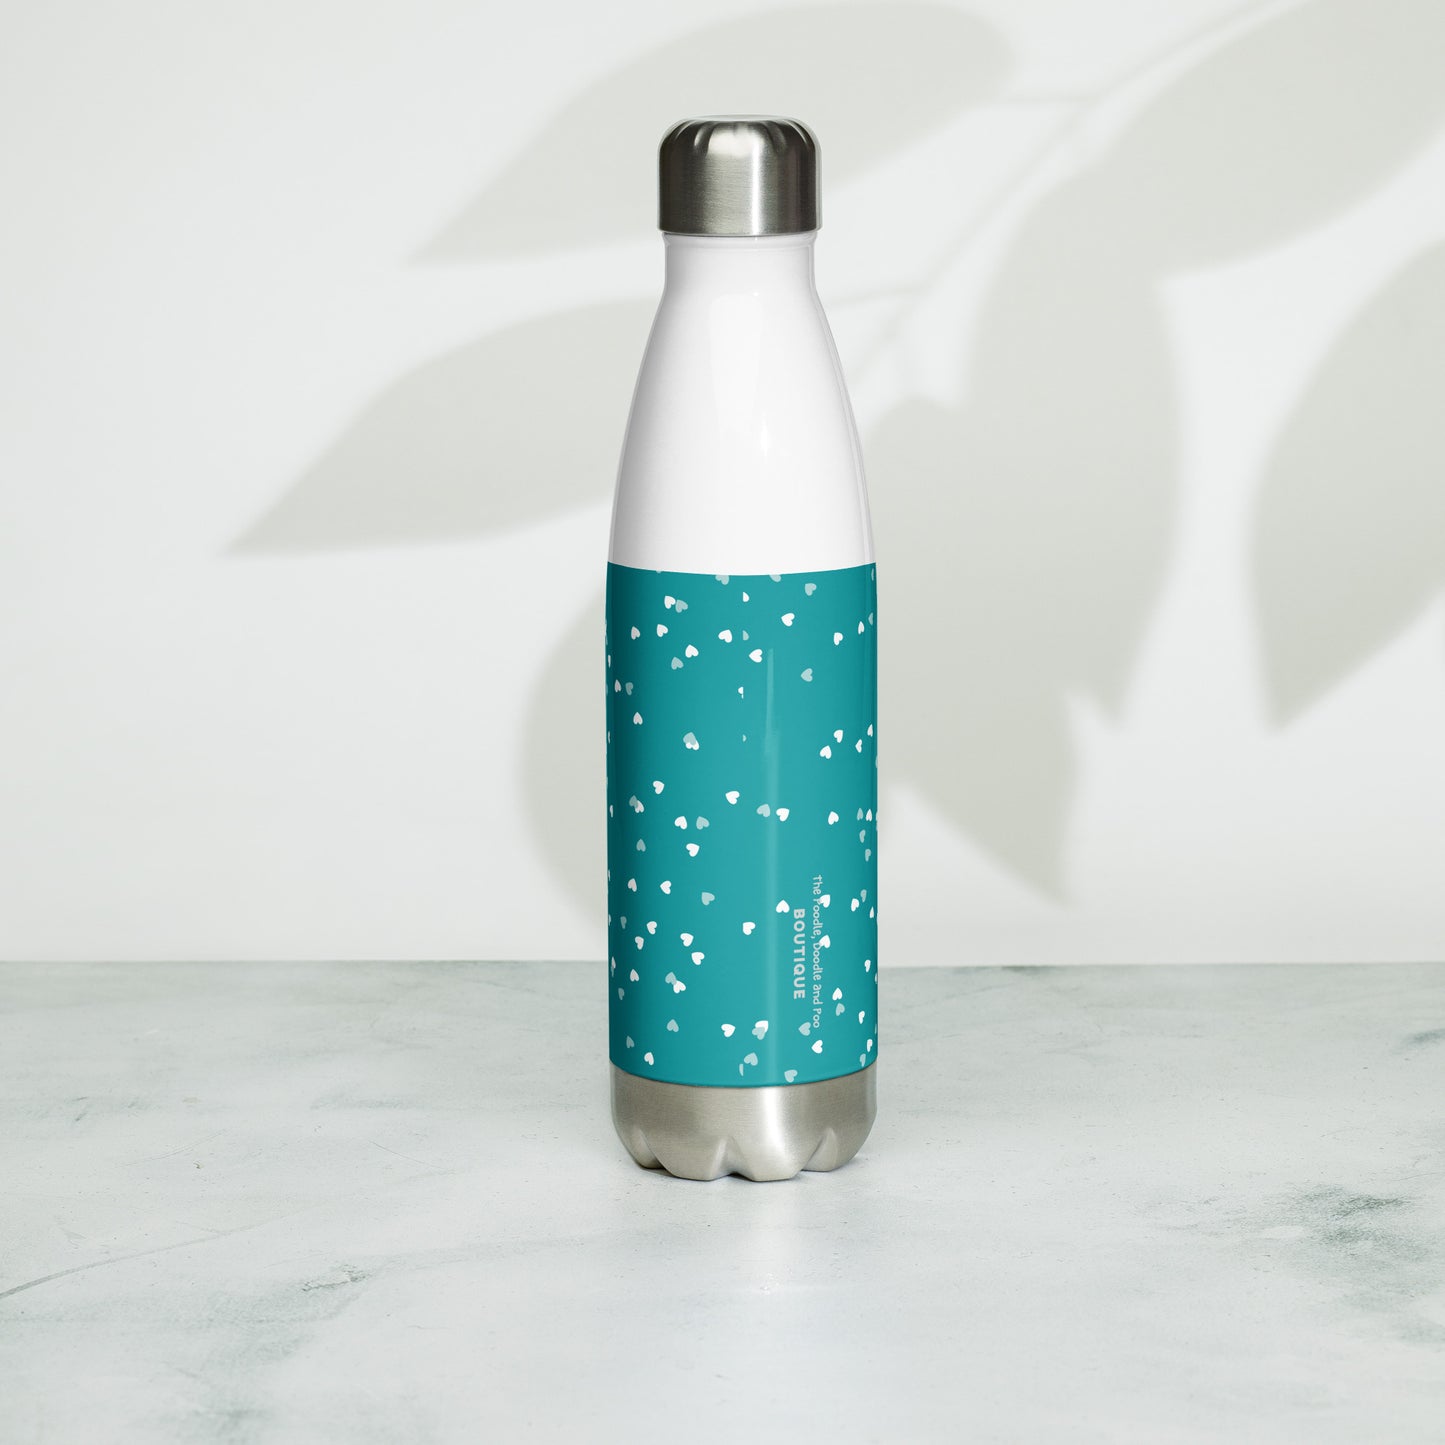 "Love" Stainless steel water bottle in teal - red golden Doodle